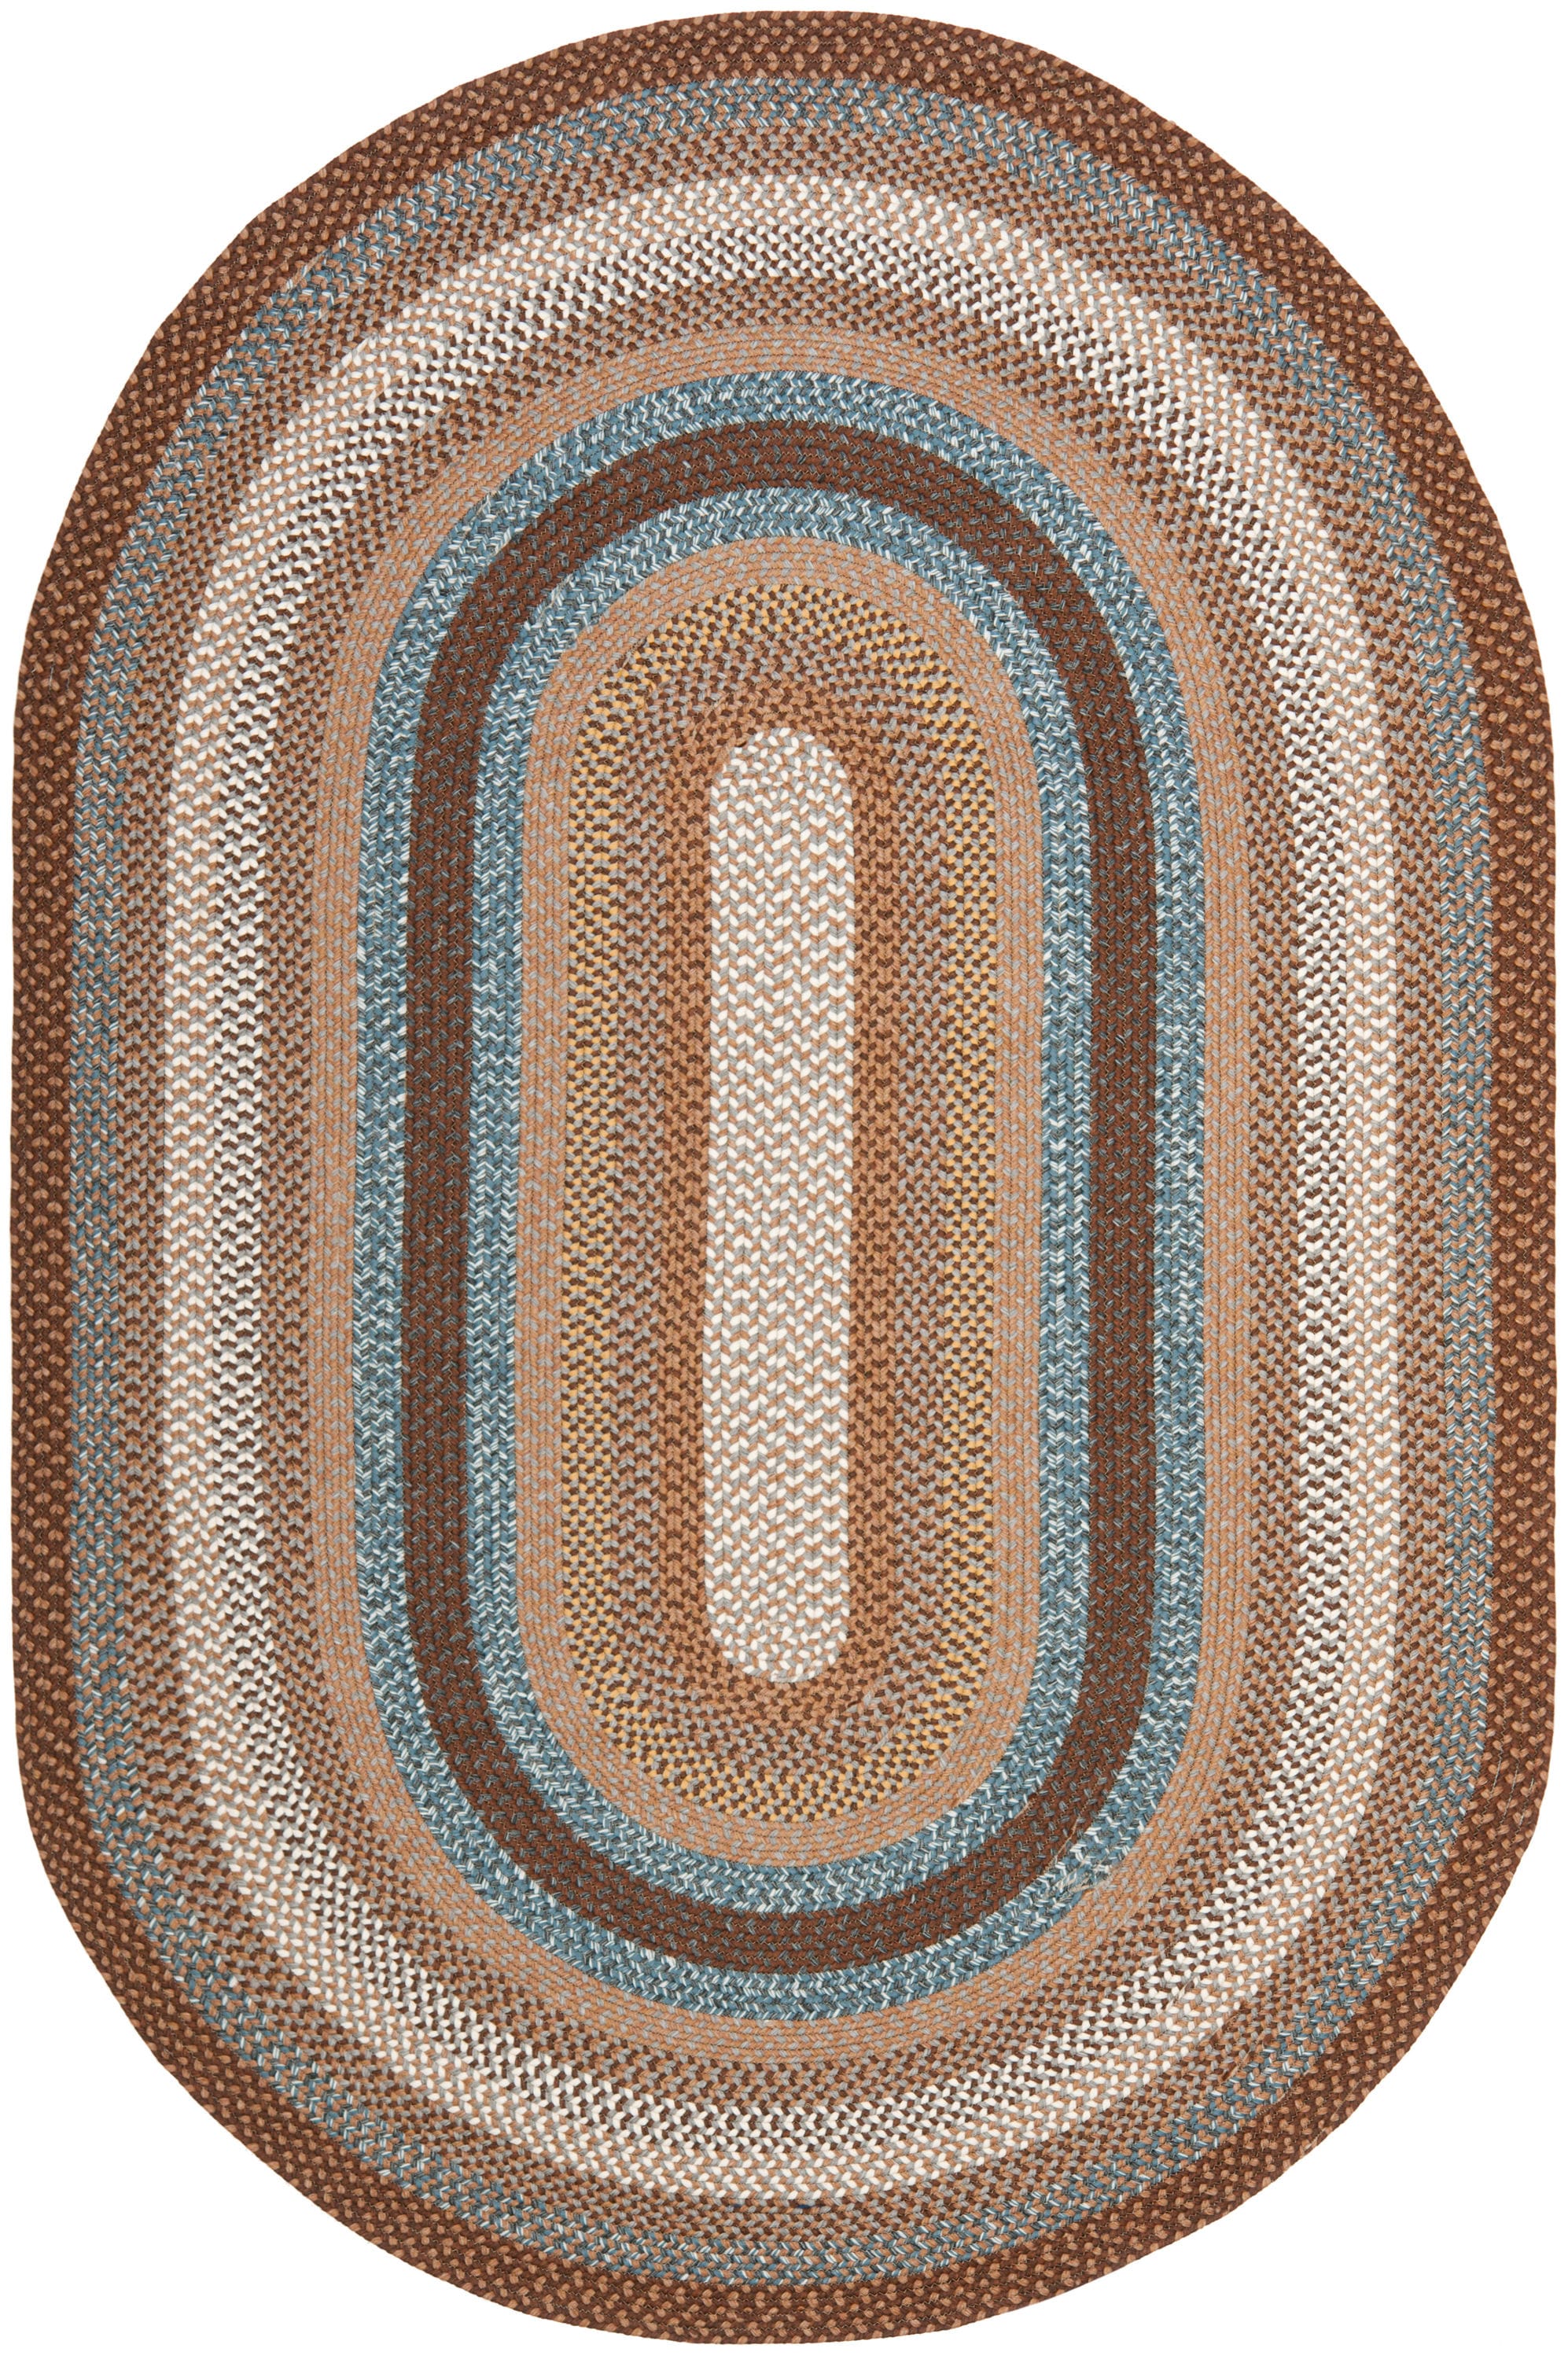 SAFAVIEH Braided Gold Beige 4 ft. x 6 ft. Abstract Striped Oval Area Rug  BRD908D-4OV - The Home Depot